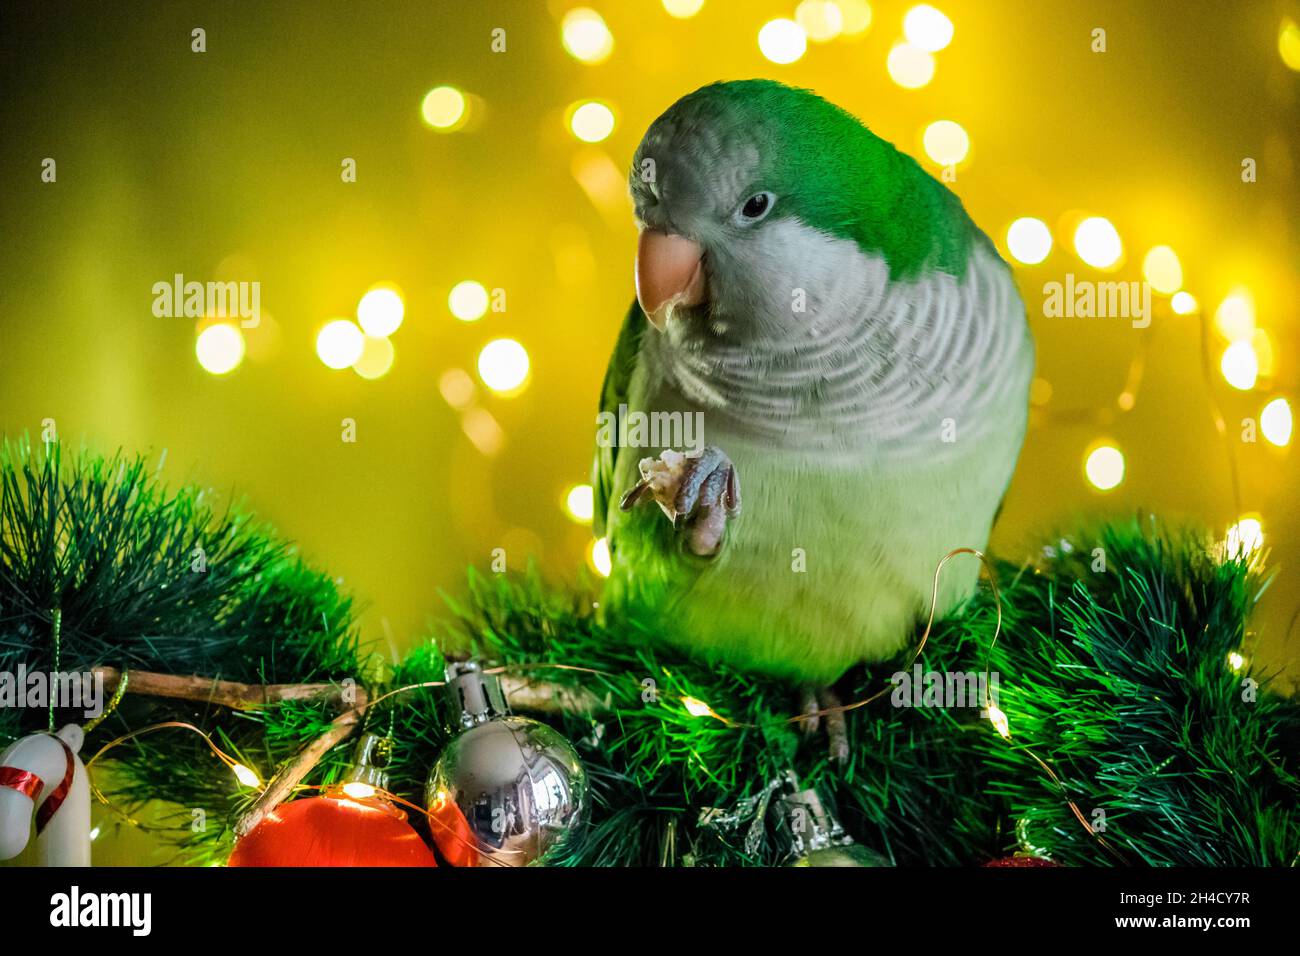 A fluffy parrot sits against the backdrop of glare and lights on New Year's Eve. Stock Photo